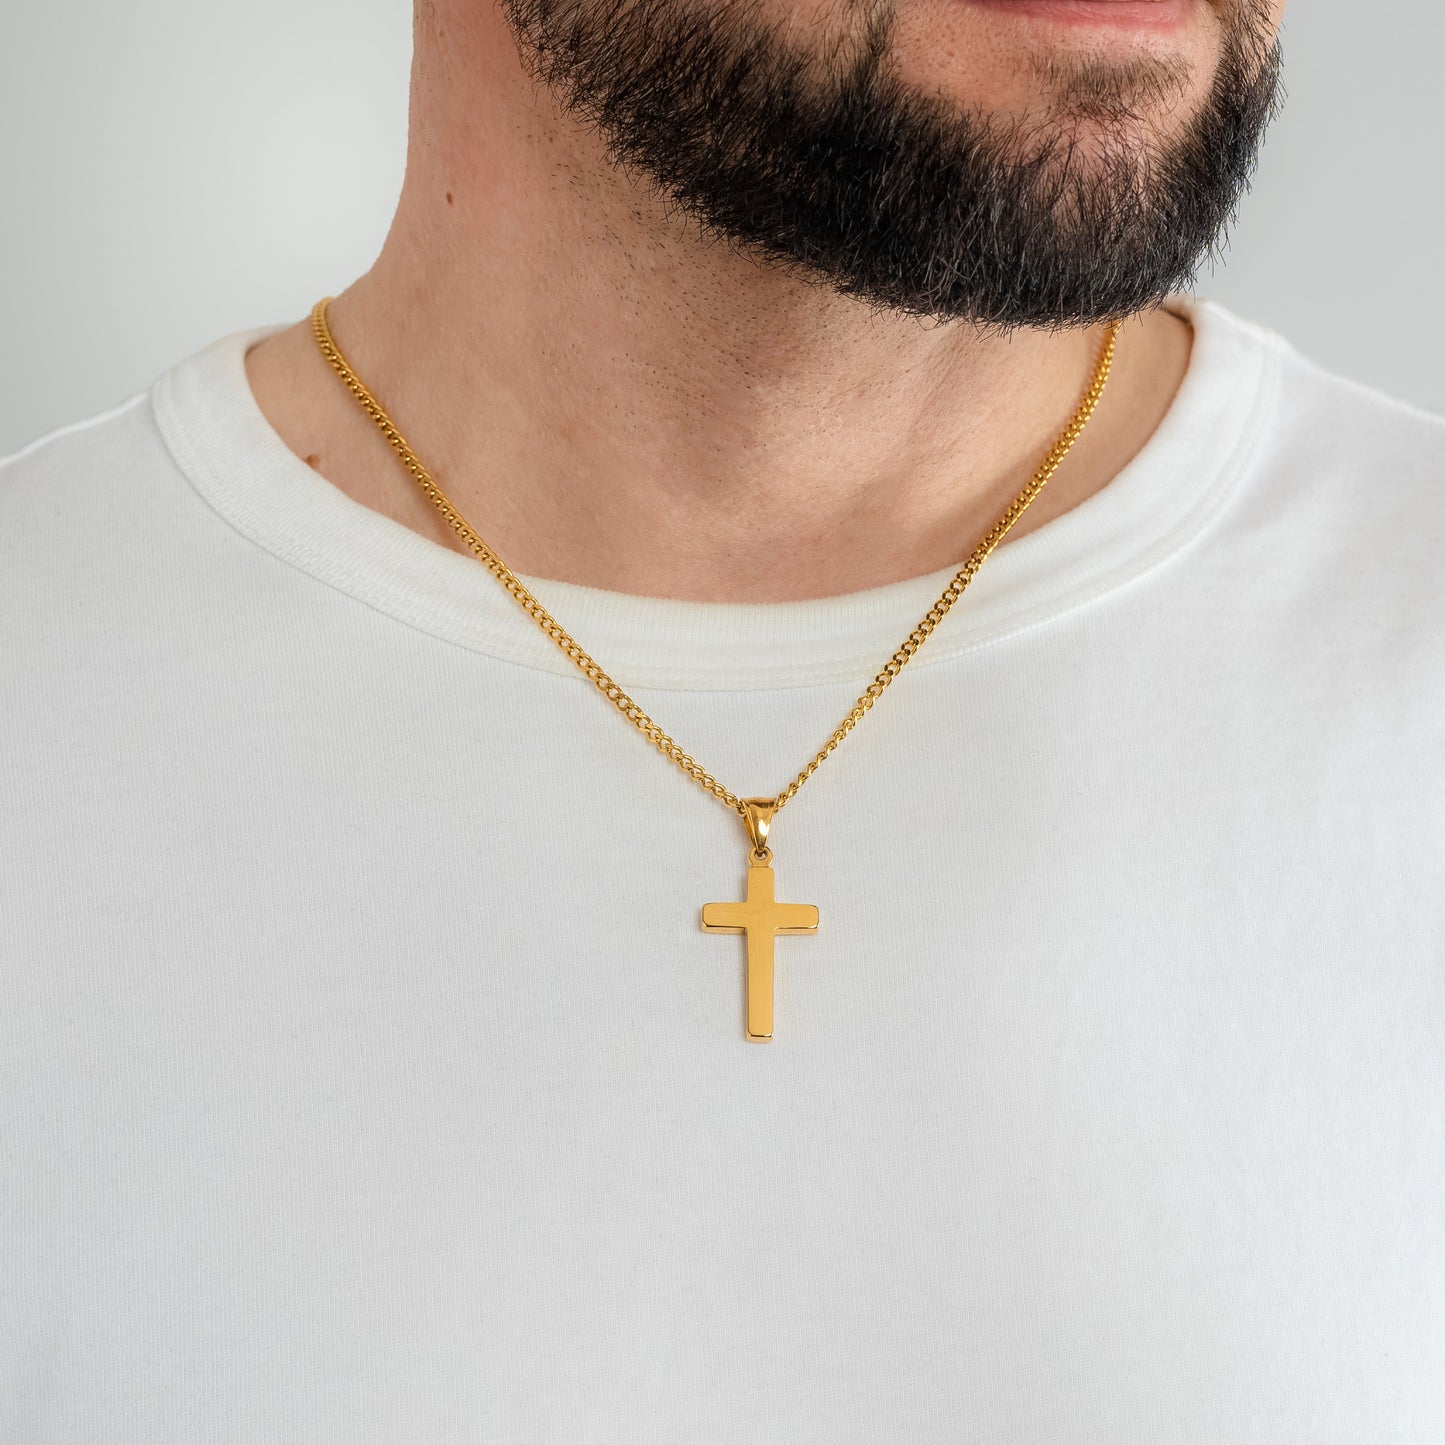 A male model in a white t-shirt wearing a Classic Cross Gold Pendant with a 3mm Micro Cuban Gold chain 22 inches. Close-up image of the waterproof, tarnish-free trending men's religious necklace.